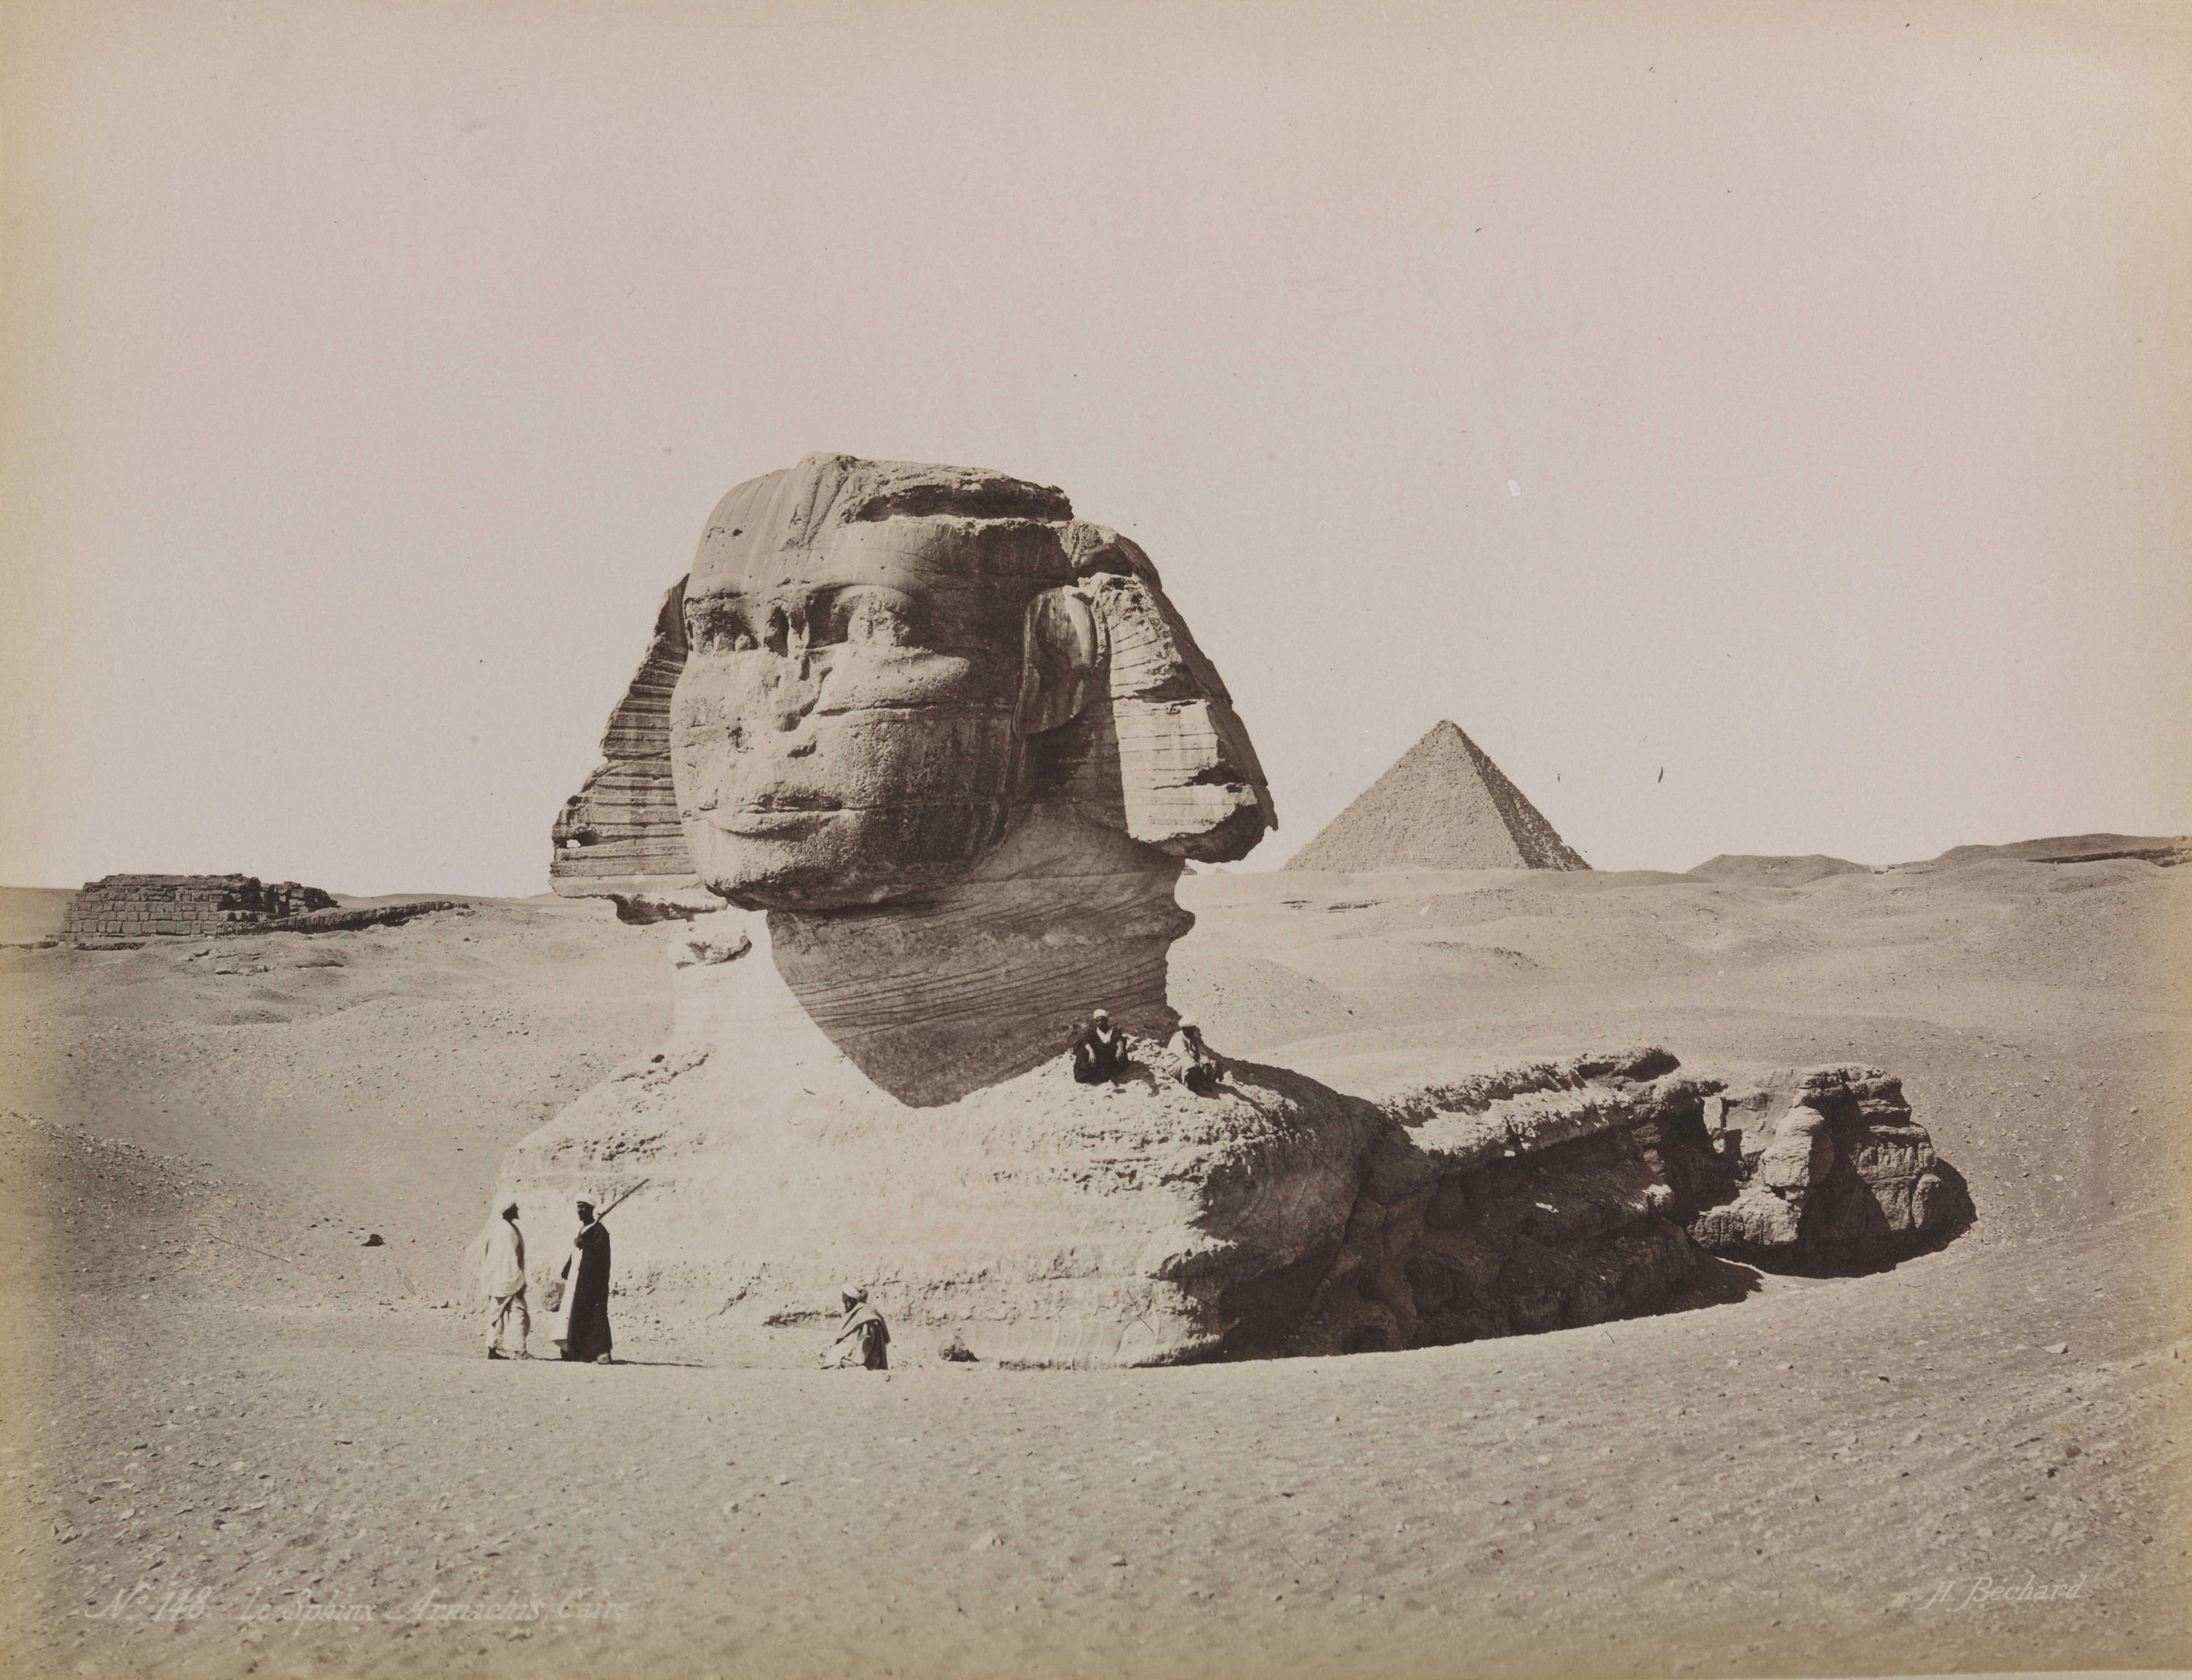 The Sphinx partially under the sand, circa 1870s (National Media Museum/Henri Bechard)